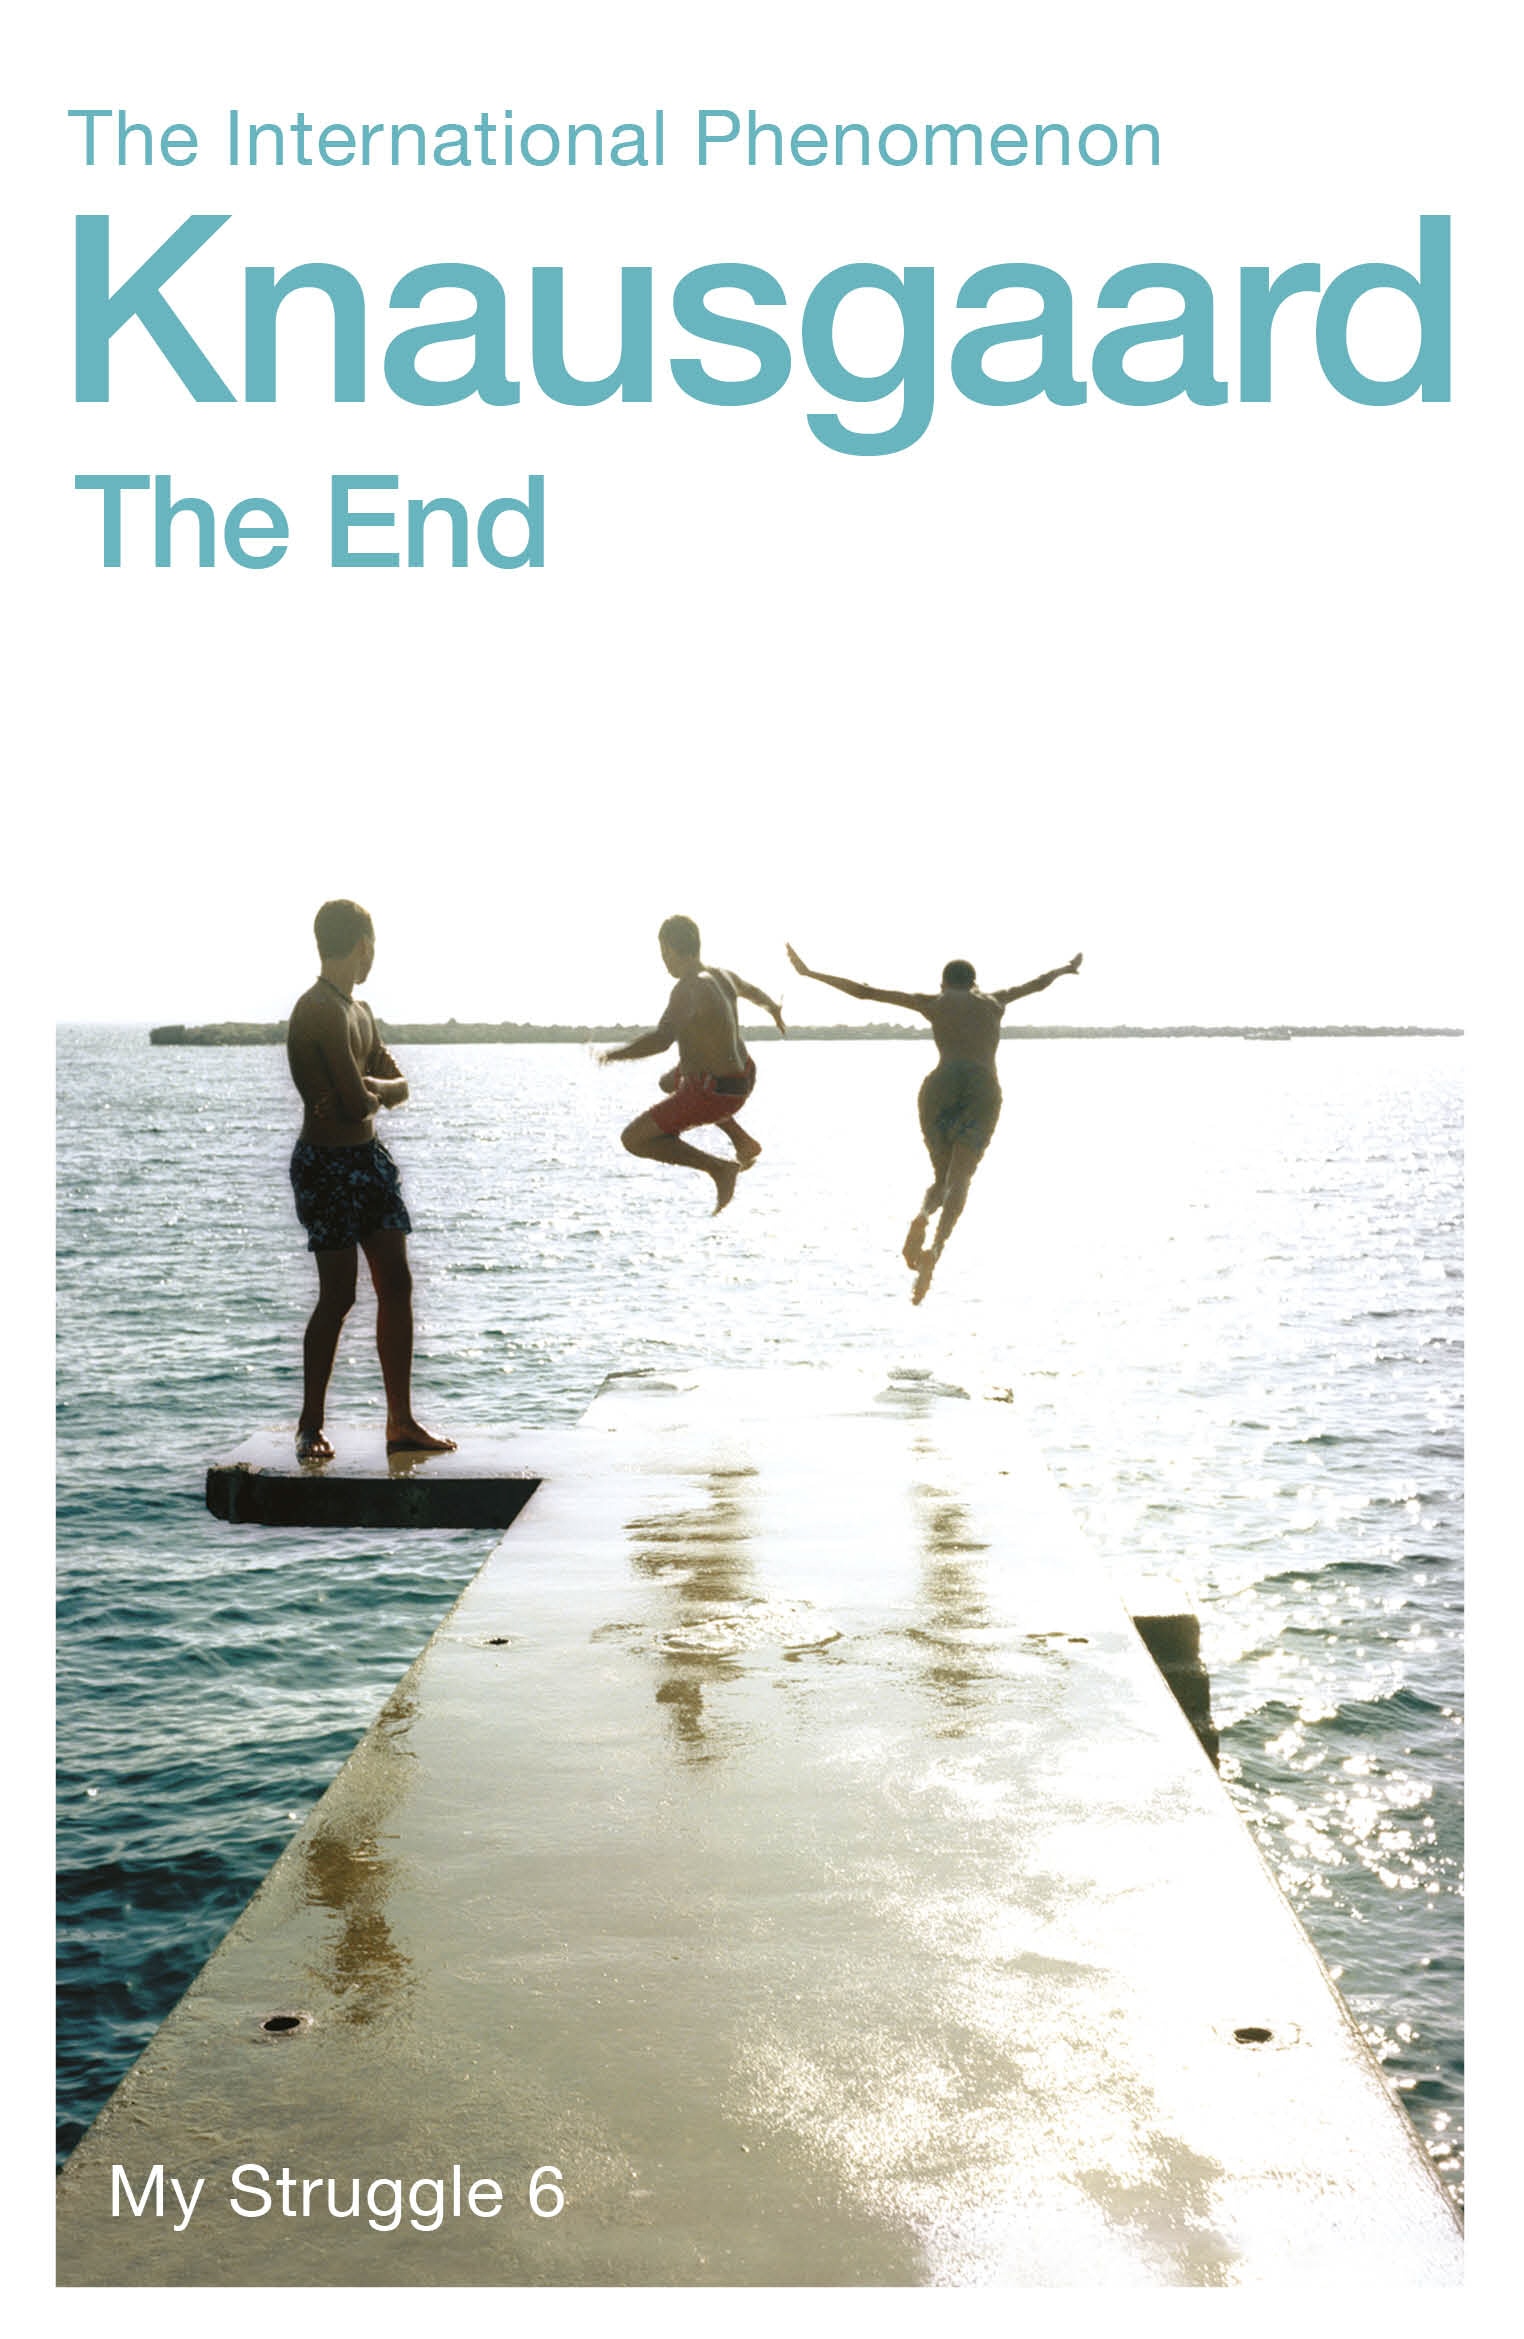 Book “The End” by Karl Ove Knausgaard — July 4, 2019